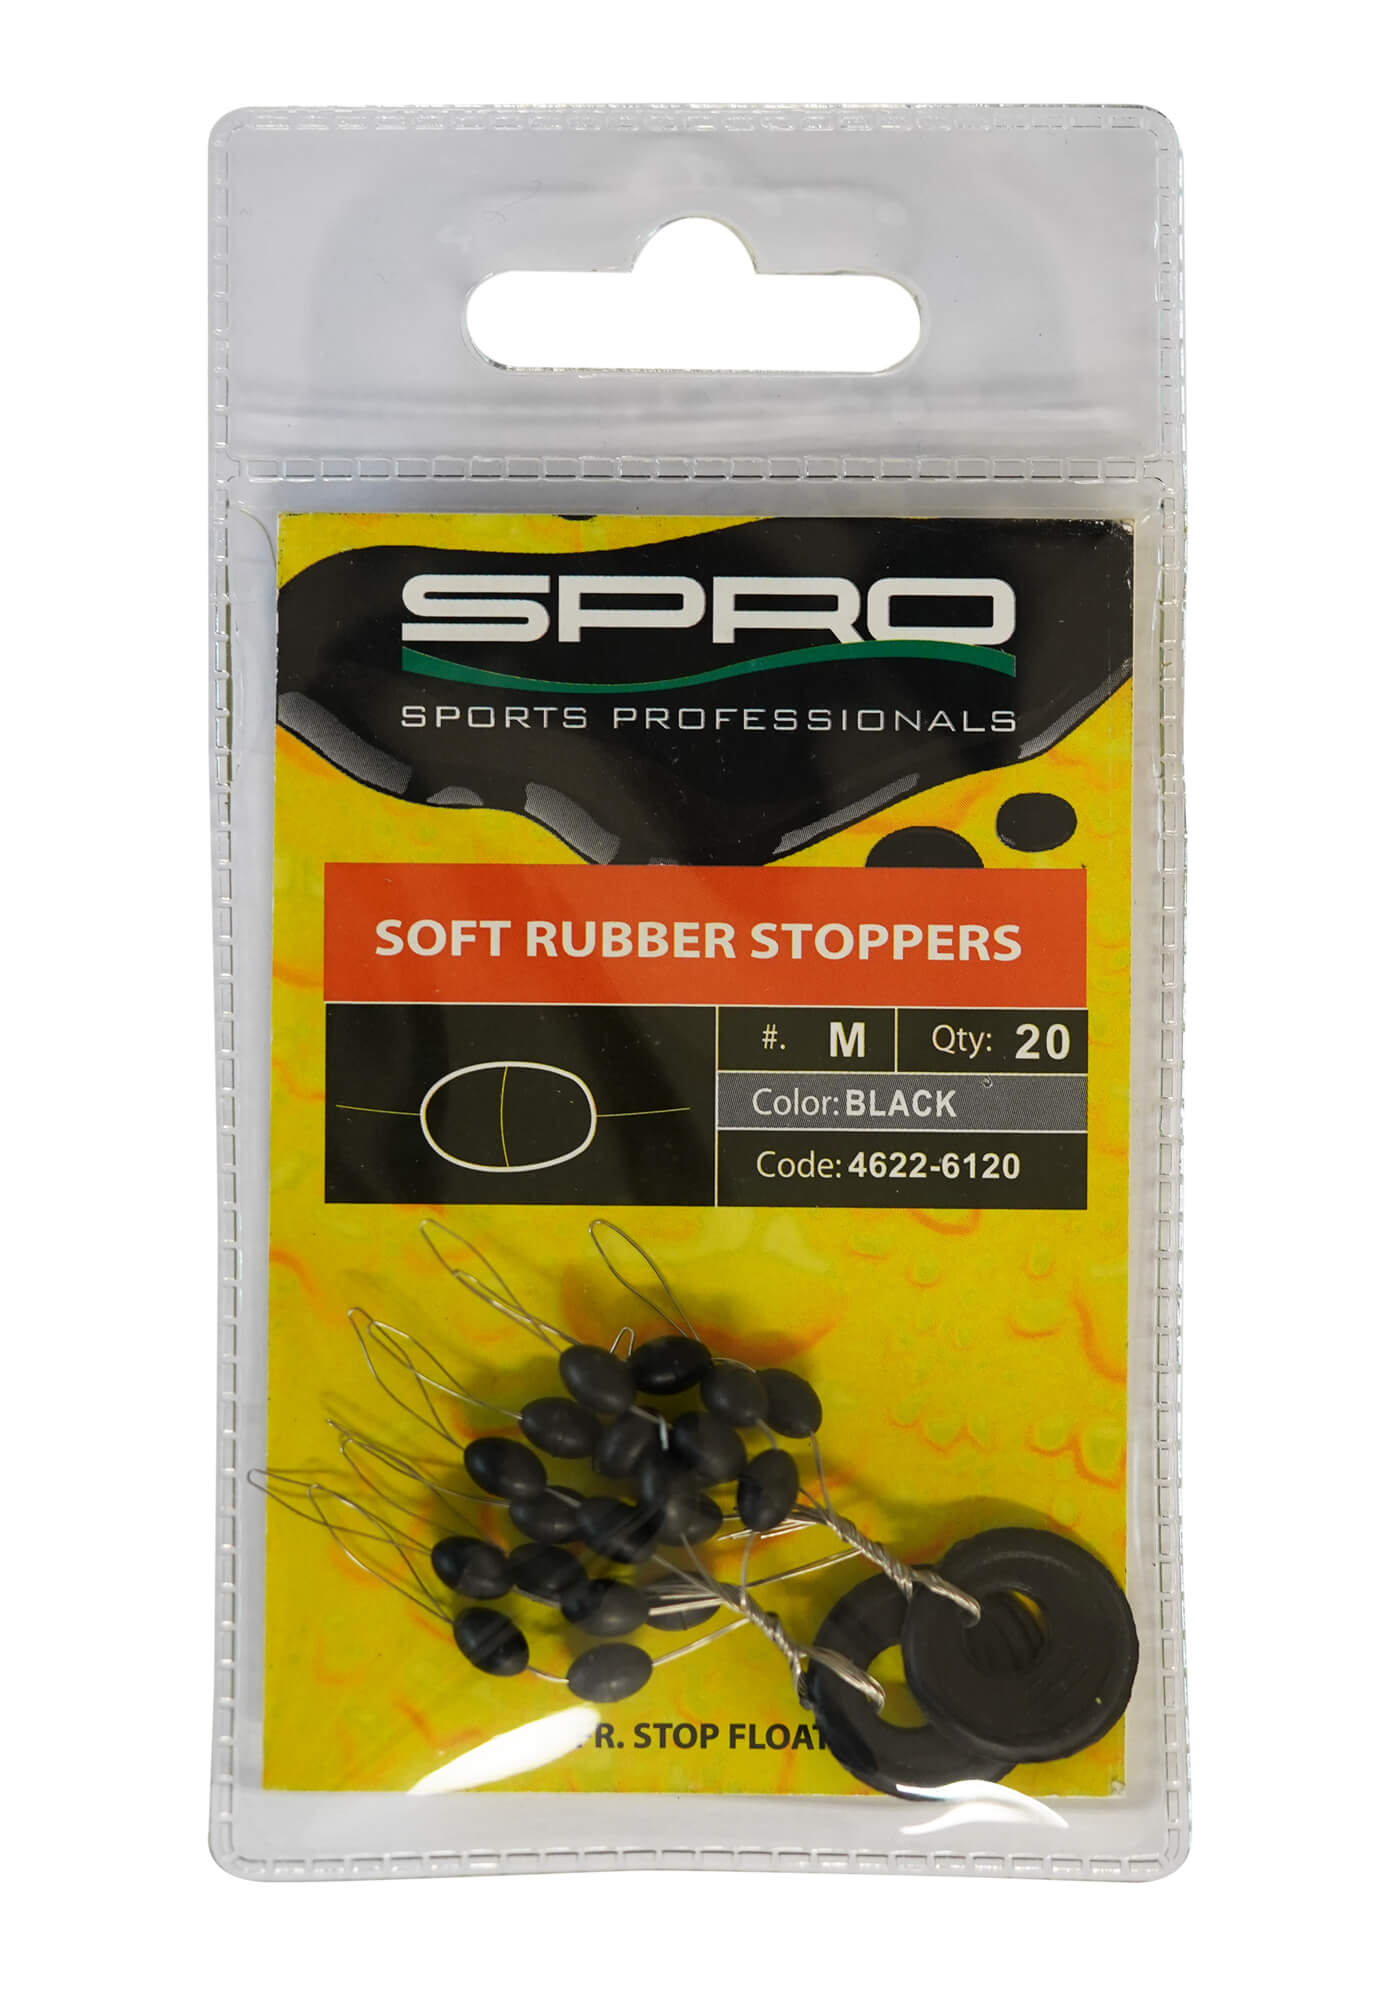 Sizes_Soft_Rubber_Stoppers_M